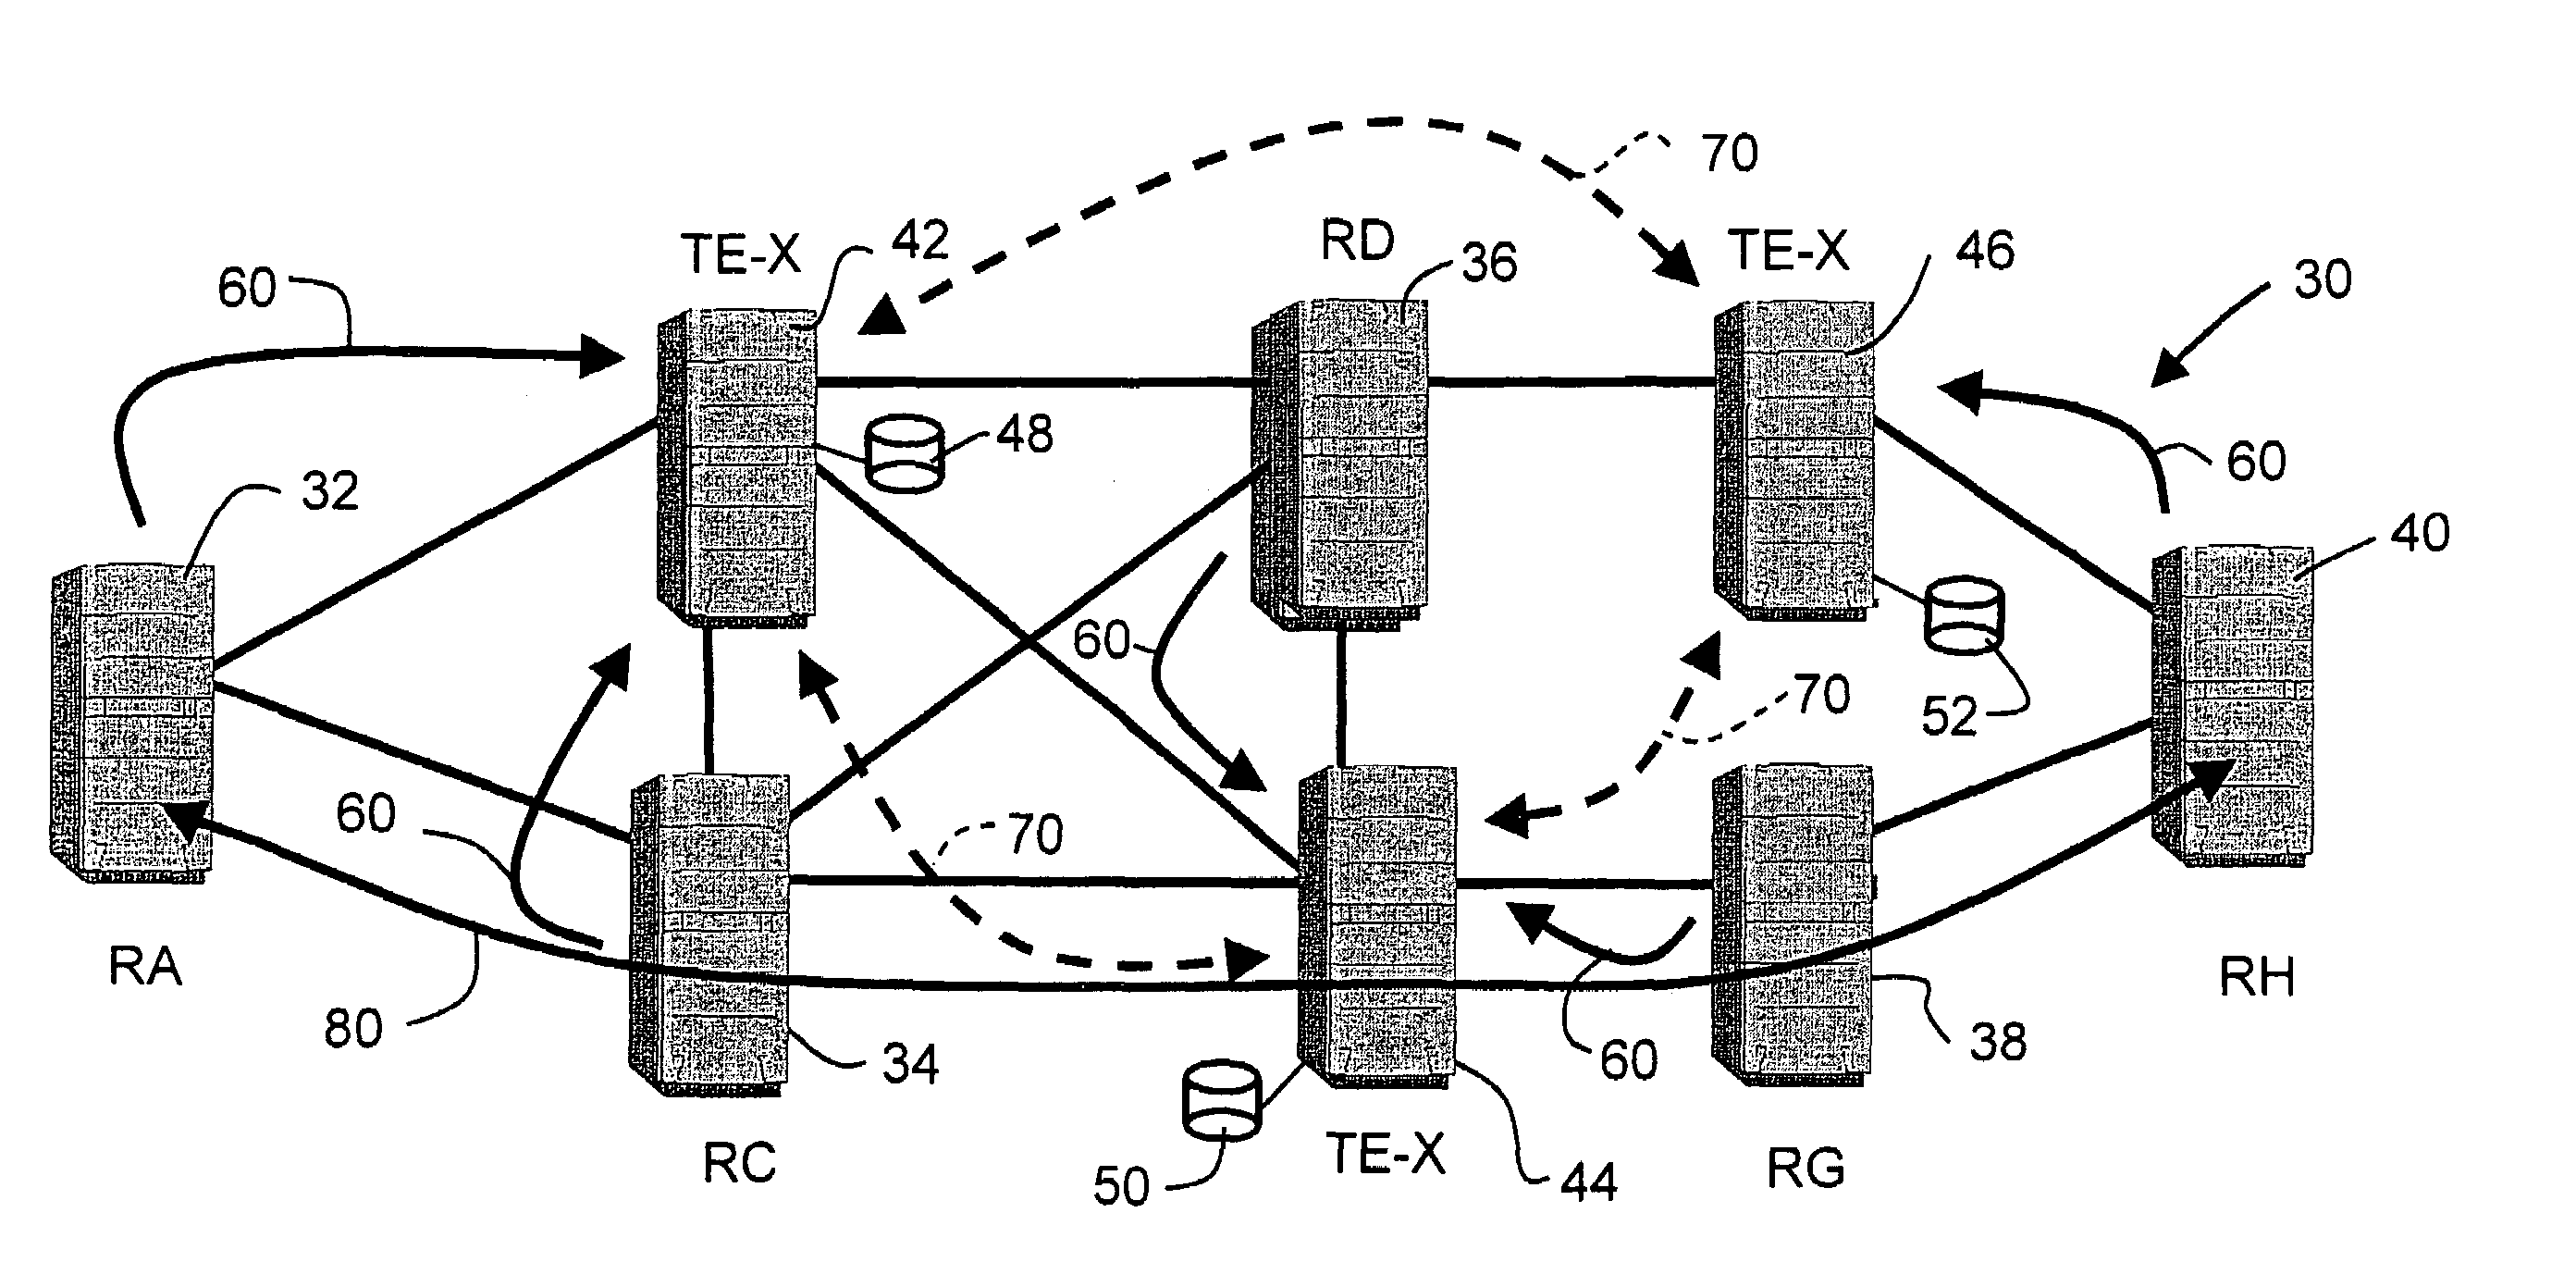 Constraint route dissemination using distributed route exchanges